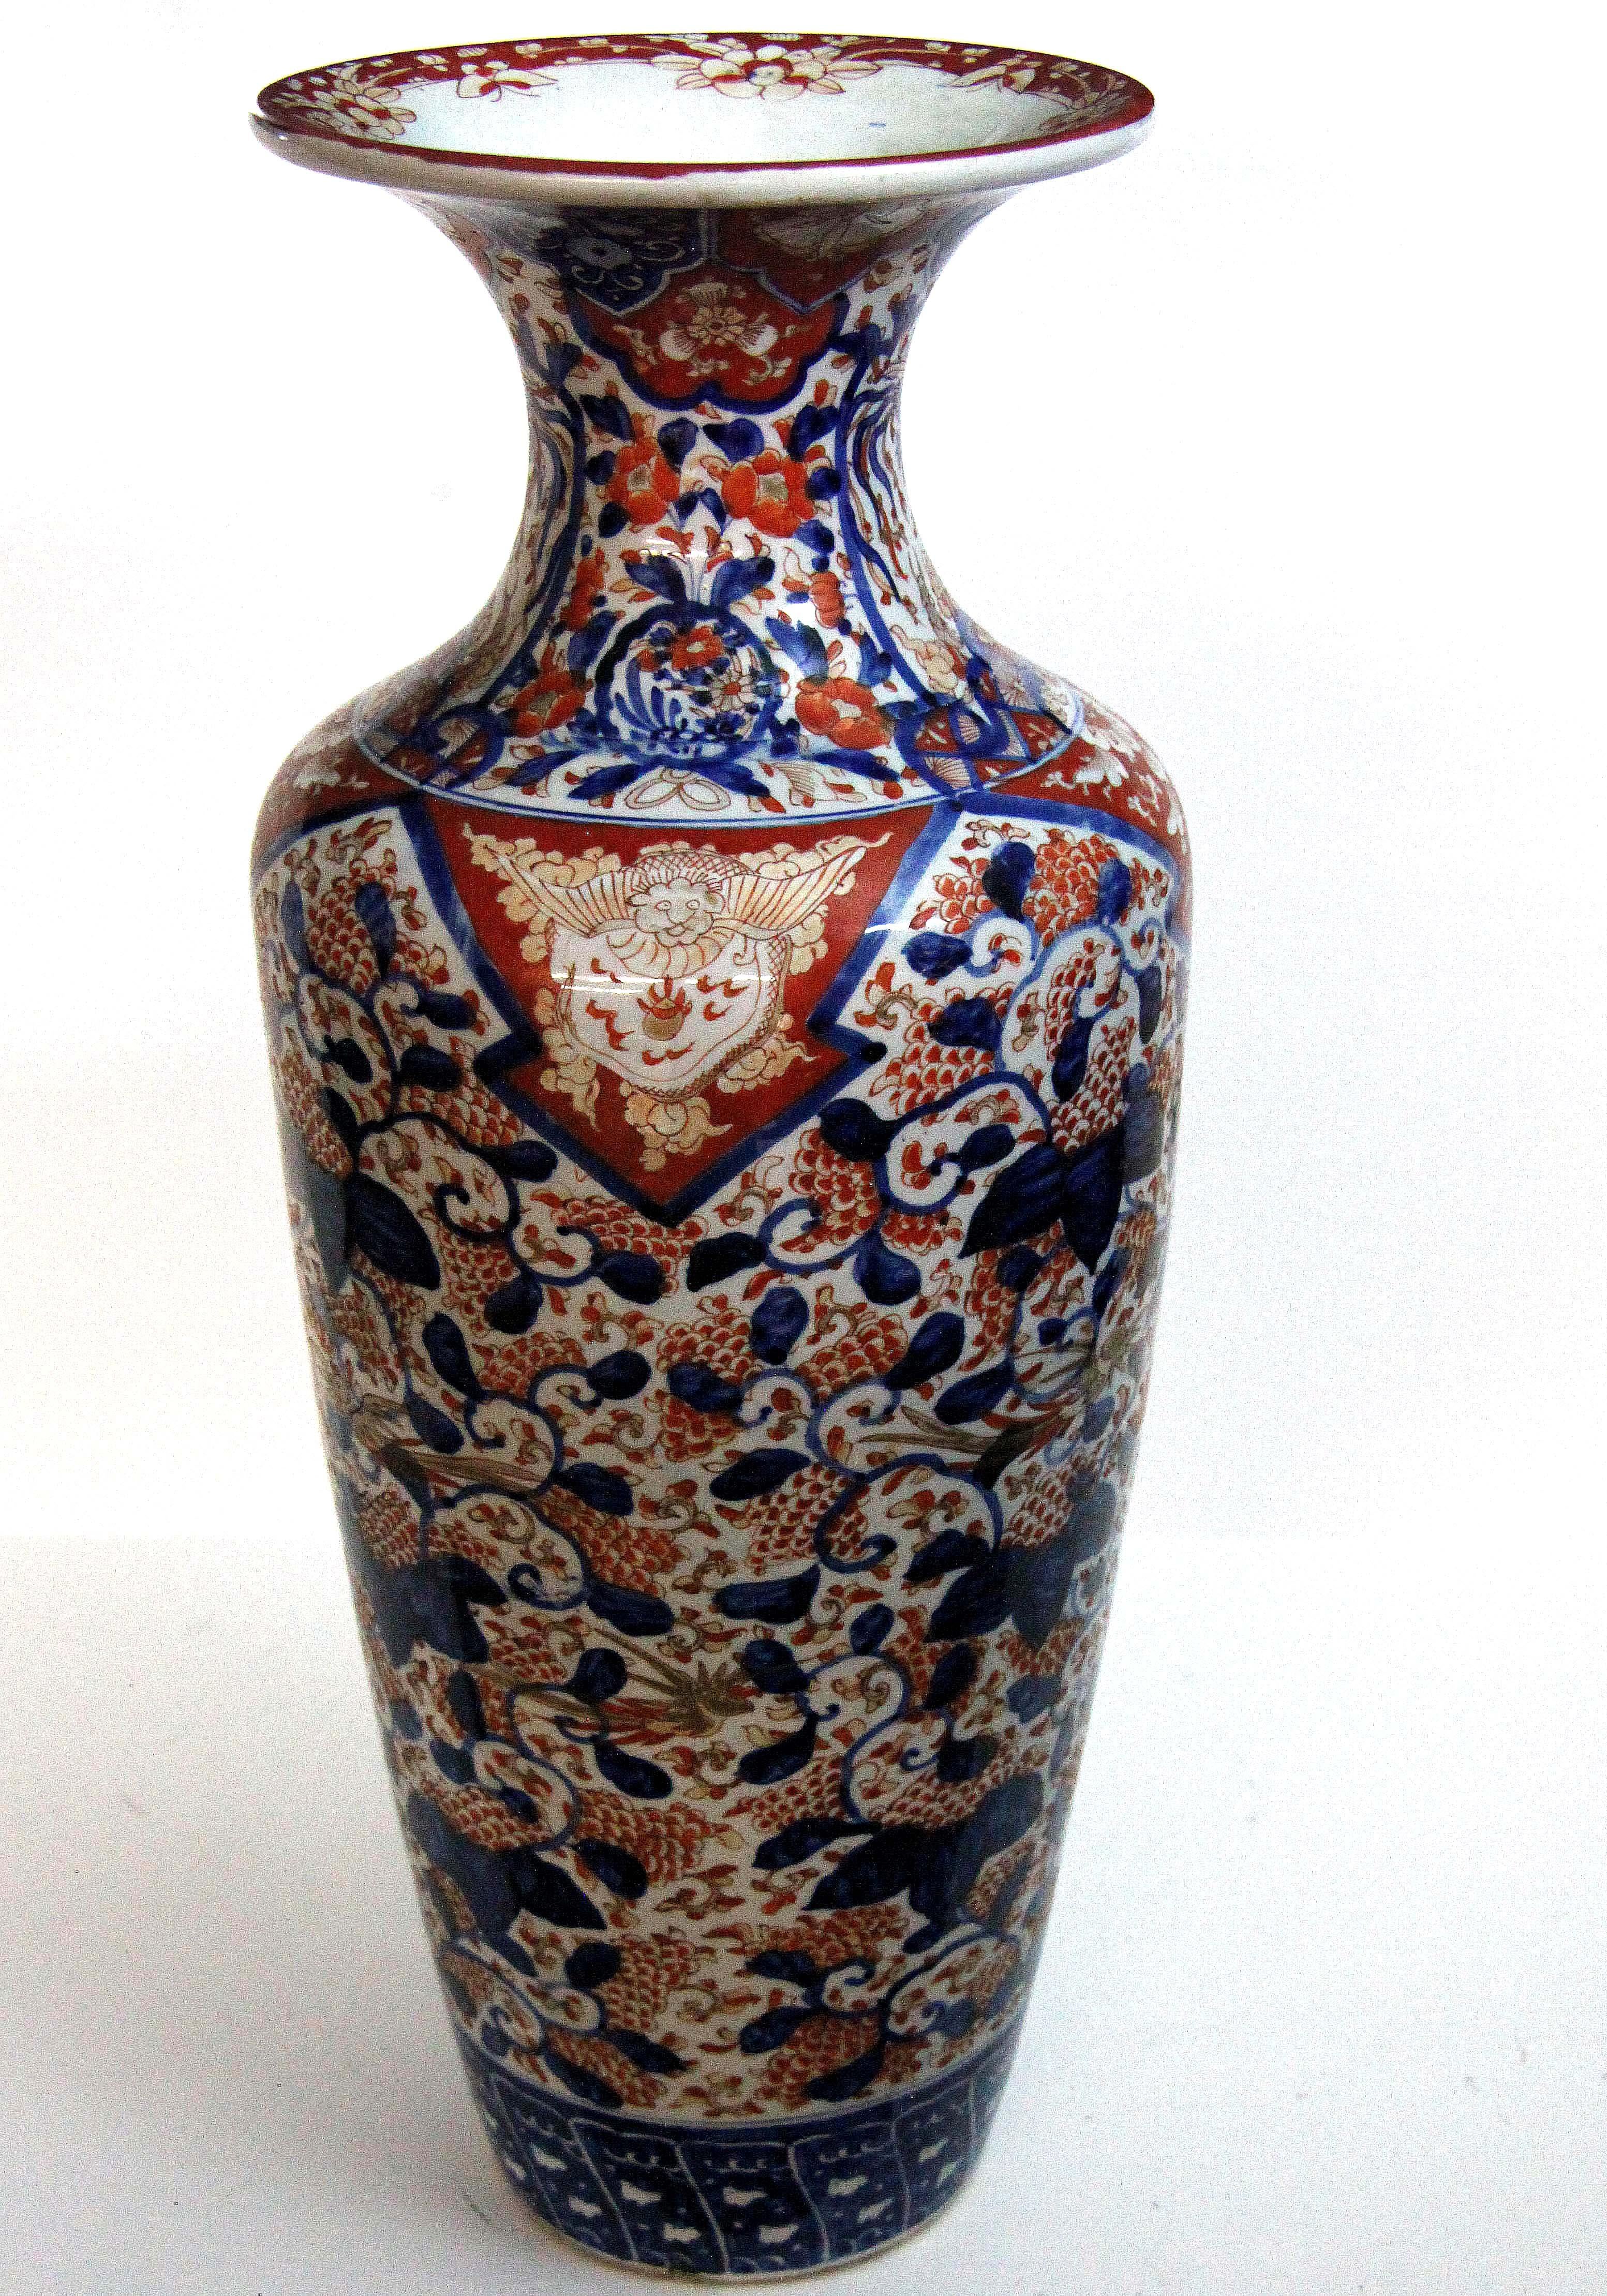 19th century Japanese Imari Temple vase, the baluster form with all-over floral design in classic Imari colors.